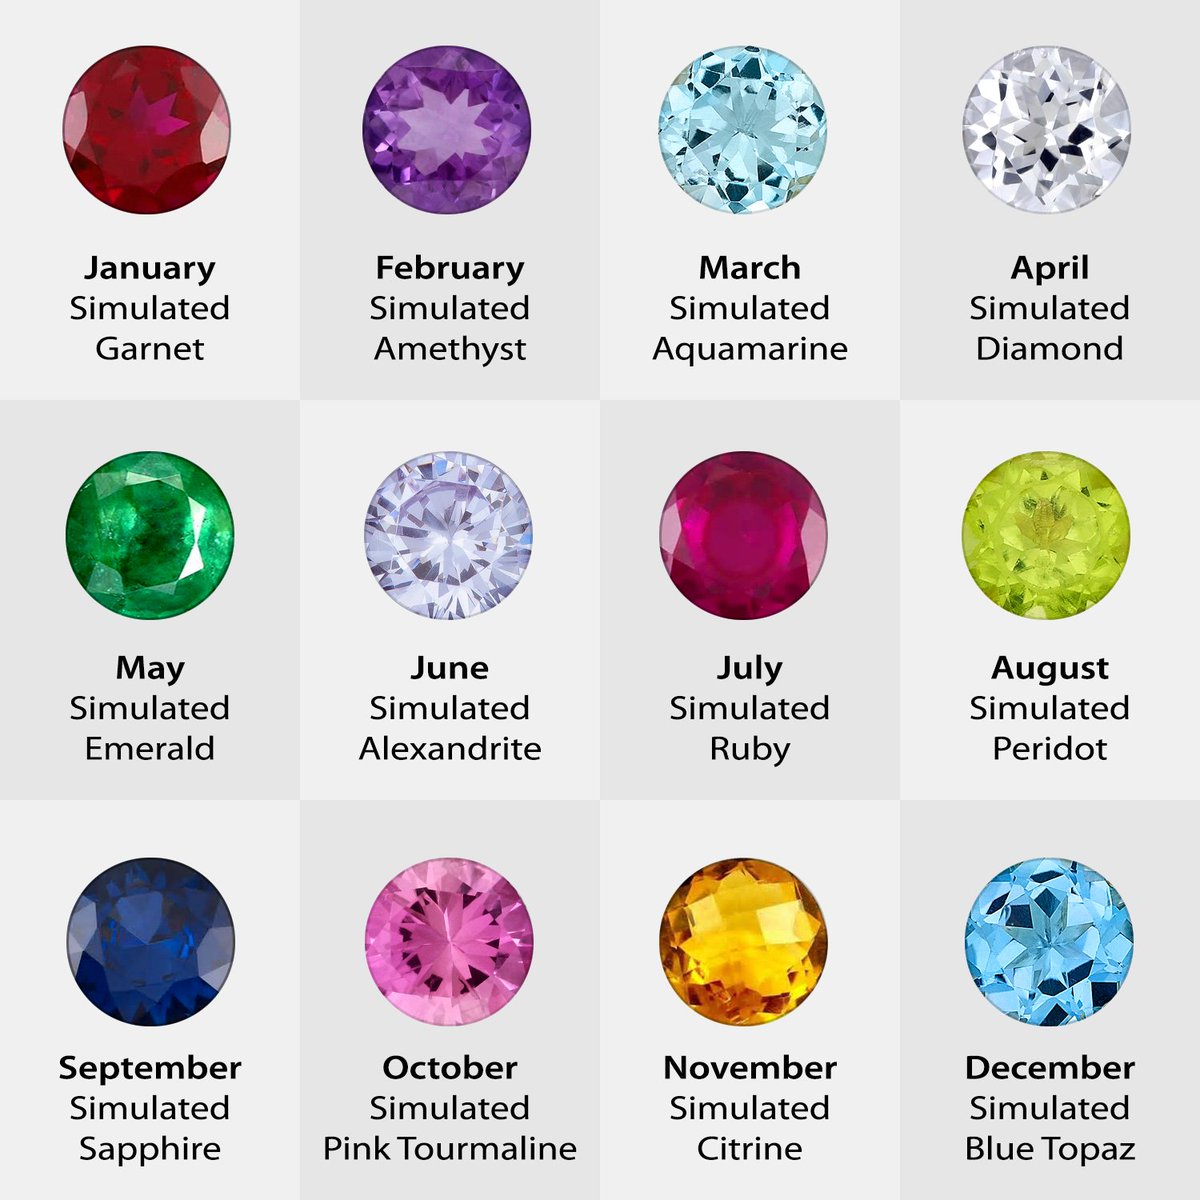 5/Red is the birthstone color for January, and it always bothered me that the blue (December) is missing in the sequence. Could the brief red in the wormhole signal a quick crash before the fireworks instead?